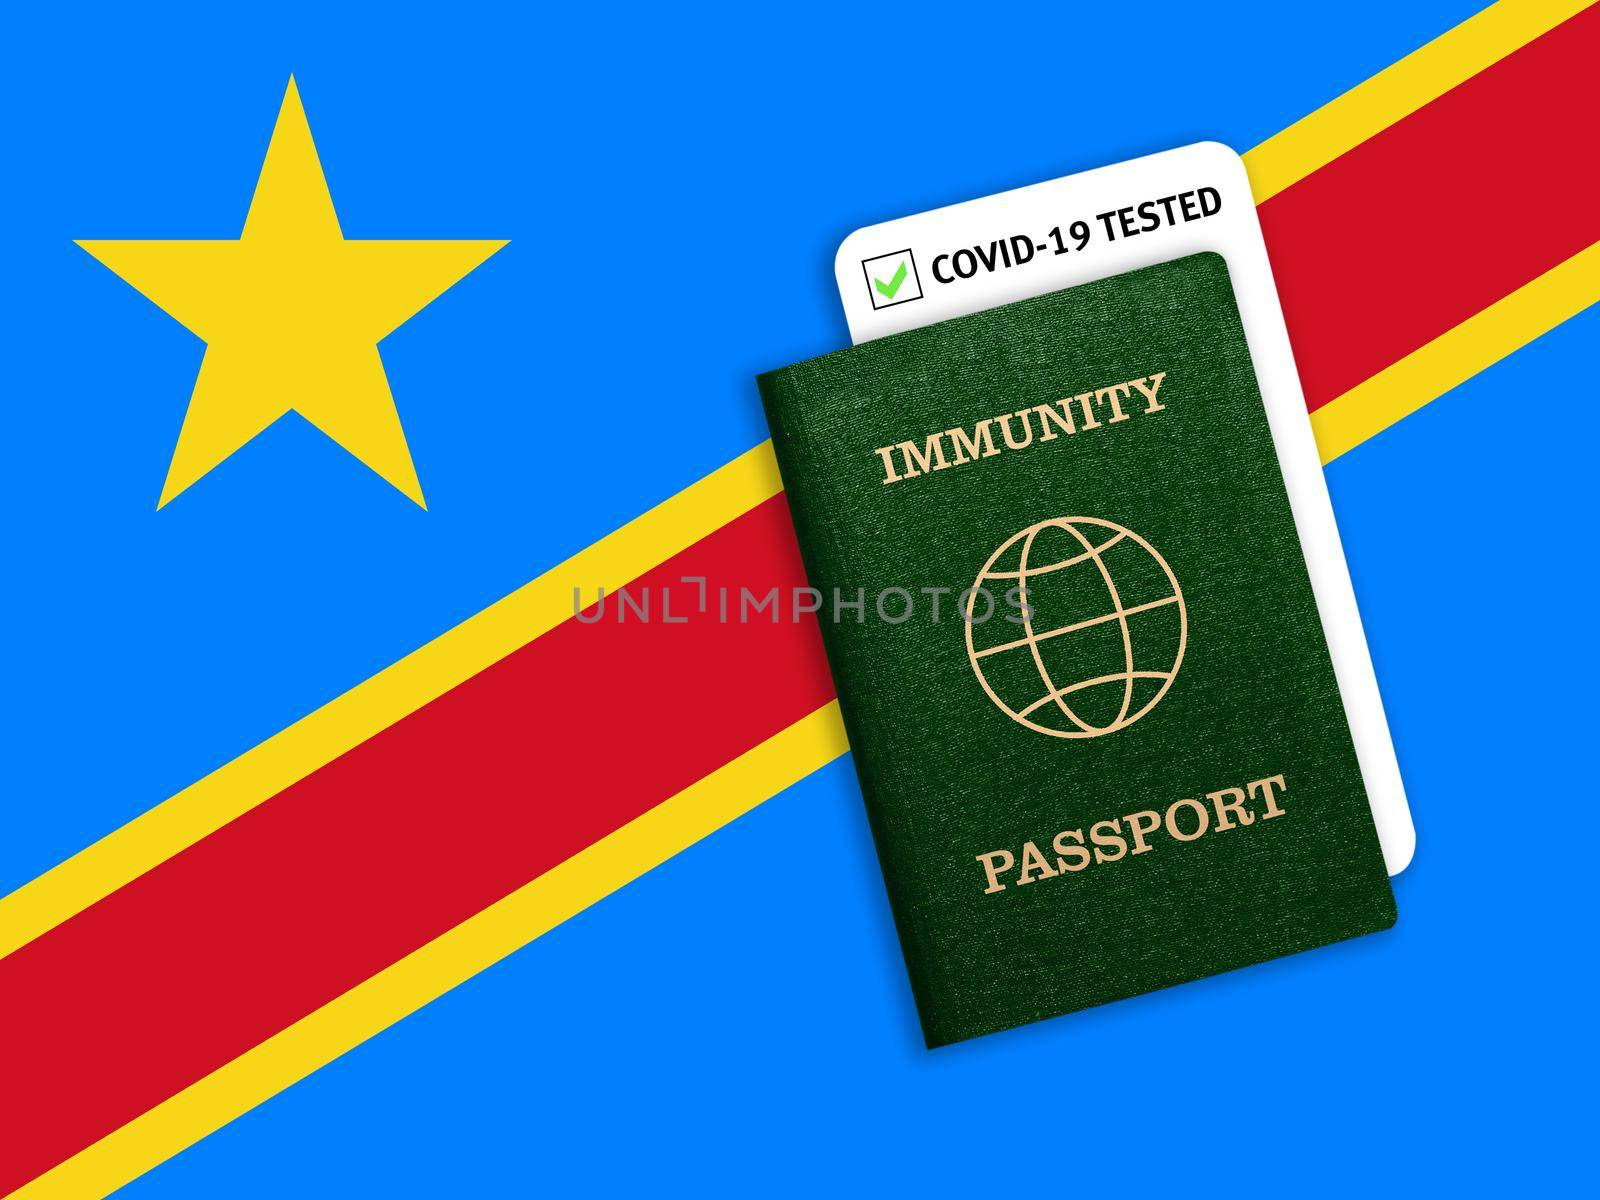 Immunity passport and test result for COVID-19 on flag of Congo by galinasharapova